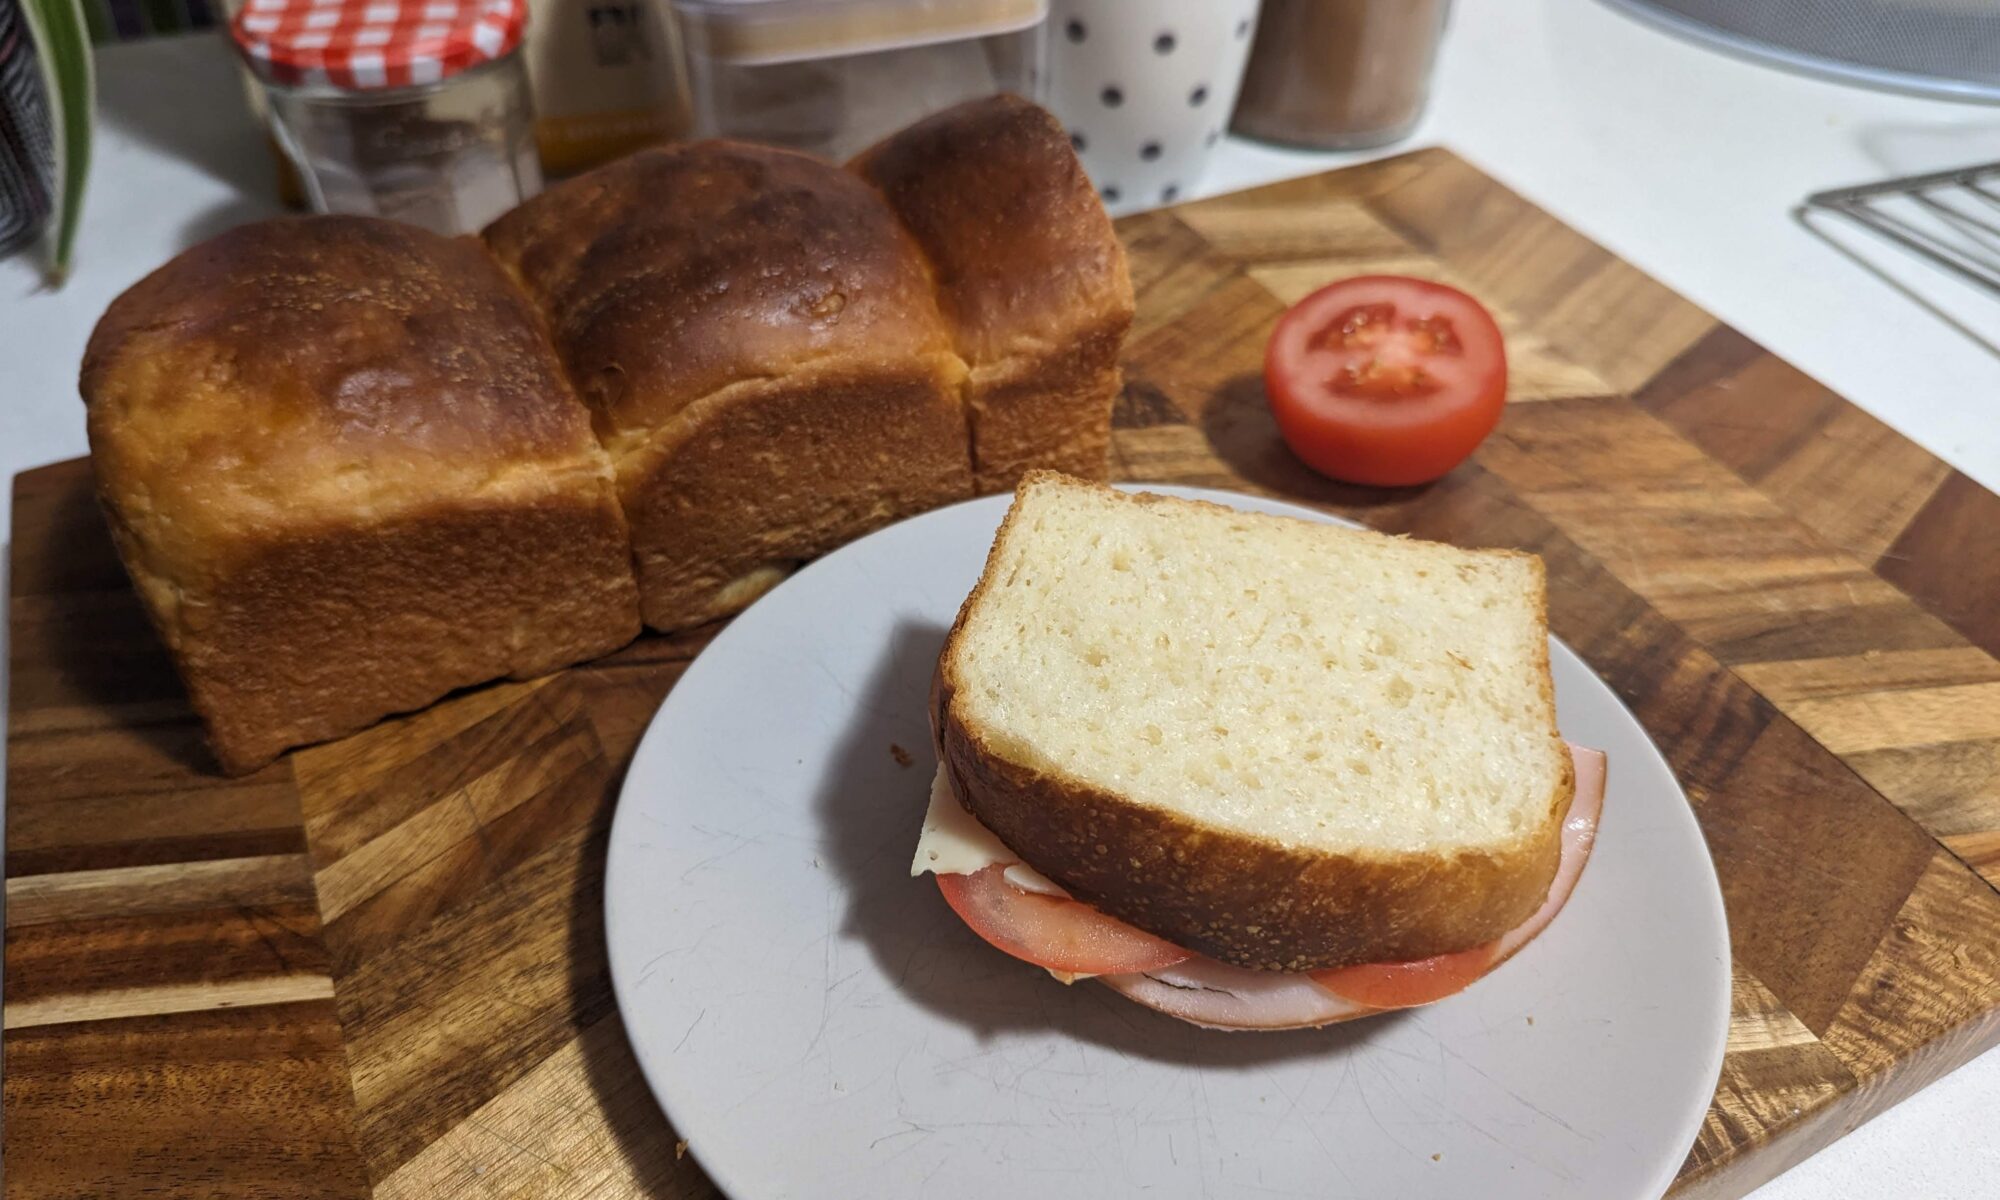 A loaf of delicious golden milk bread, with a freshly made ham cheese and tomato sandwich in the foreground. It looks succulent.